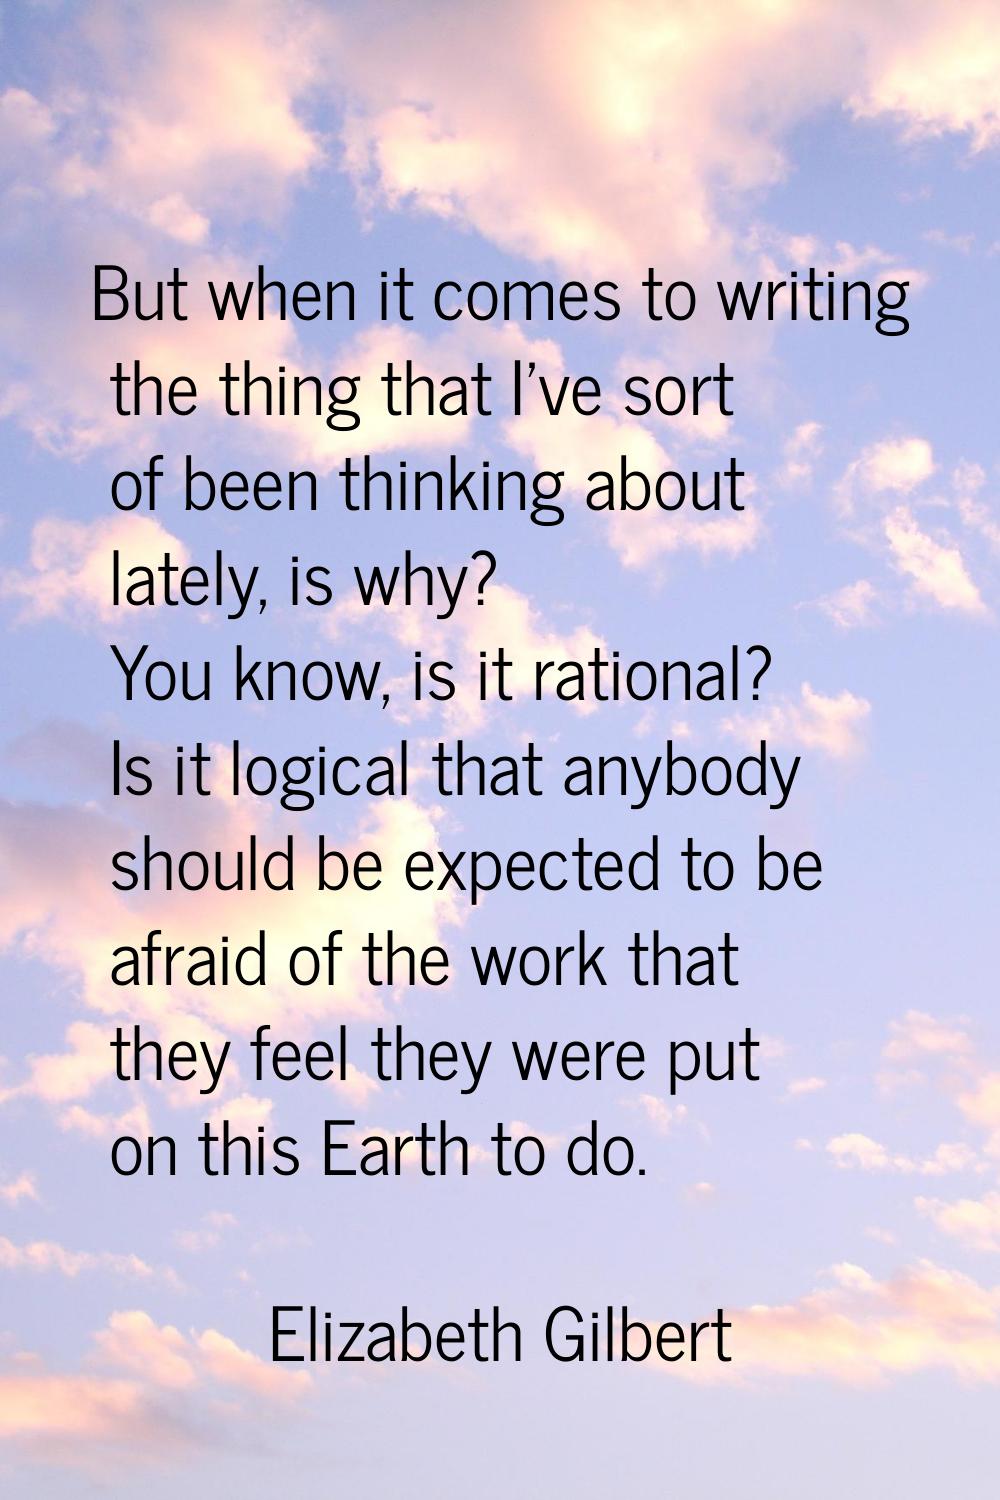 But when it comes to writing the thing that I've sort of been thinking about lately, is why? You kn